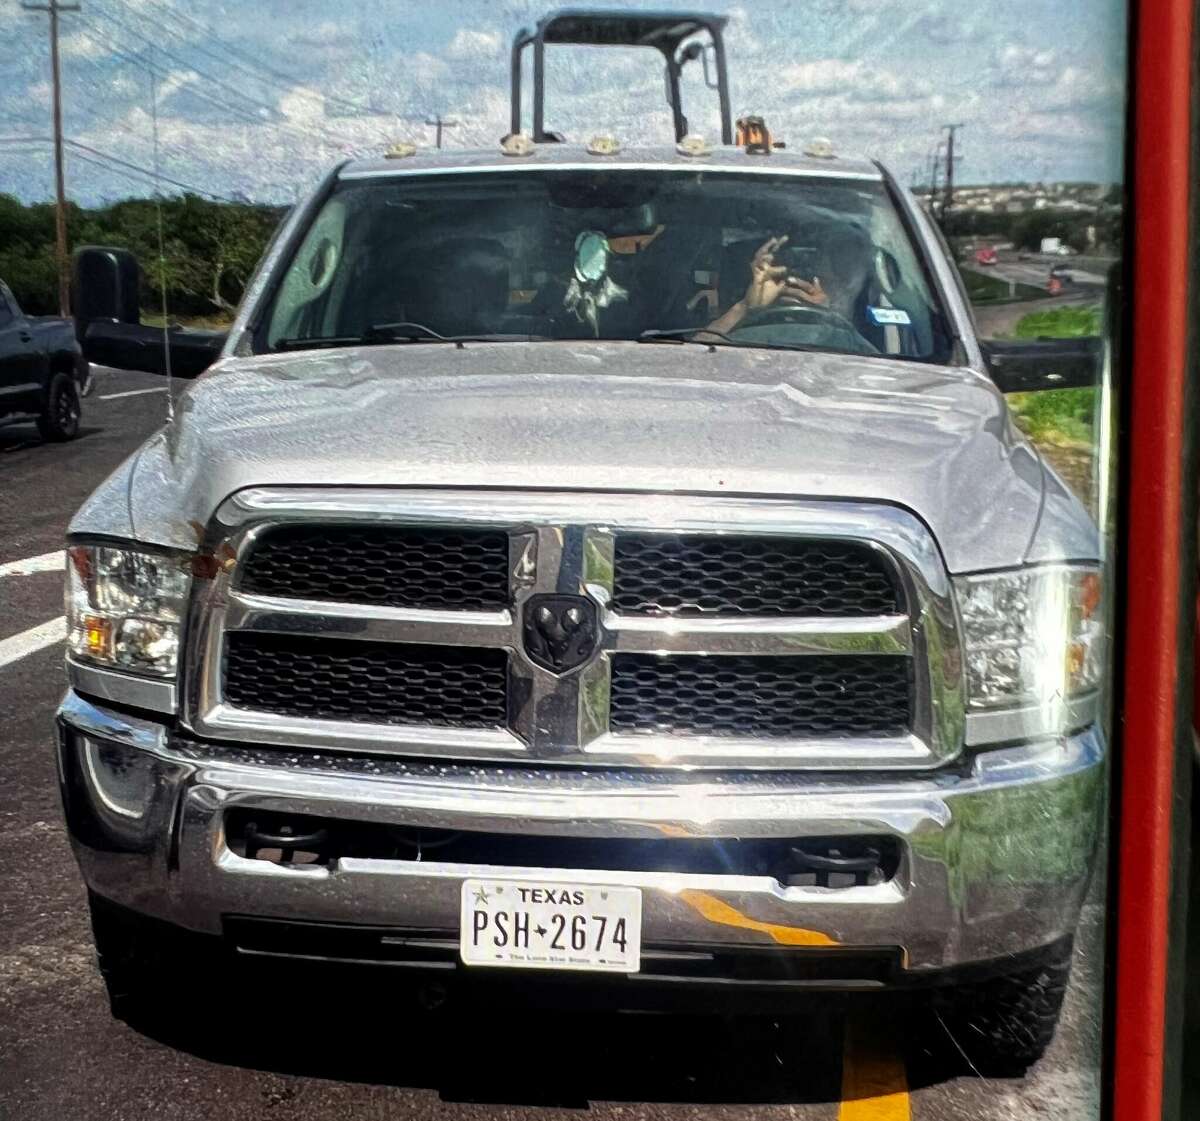 BCSO are asking for help locating the driver of a 2015 Dodge Ram